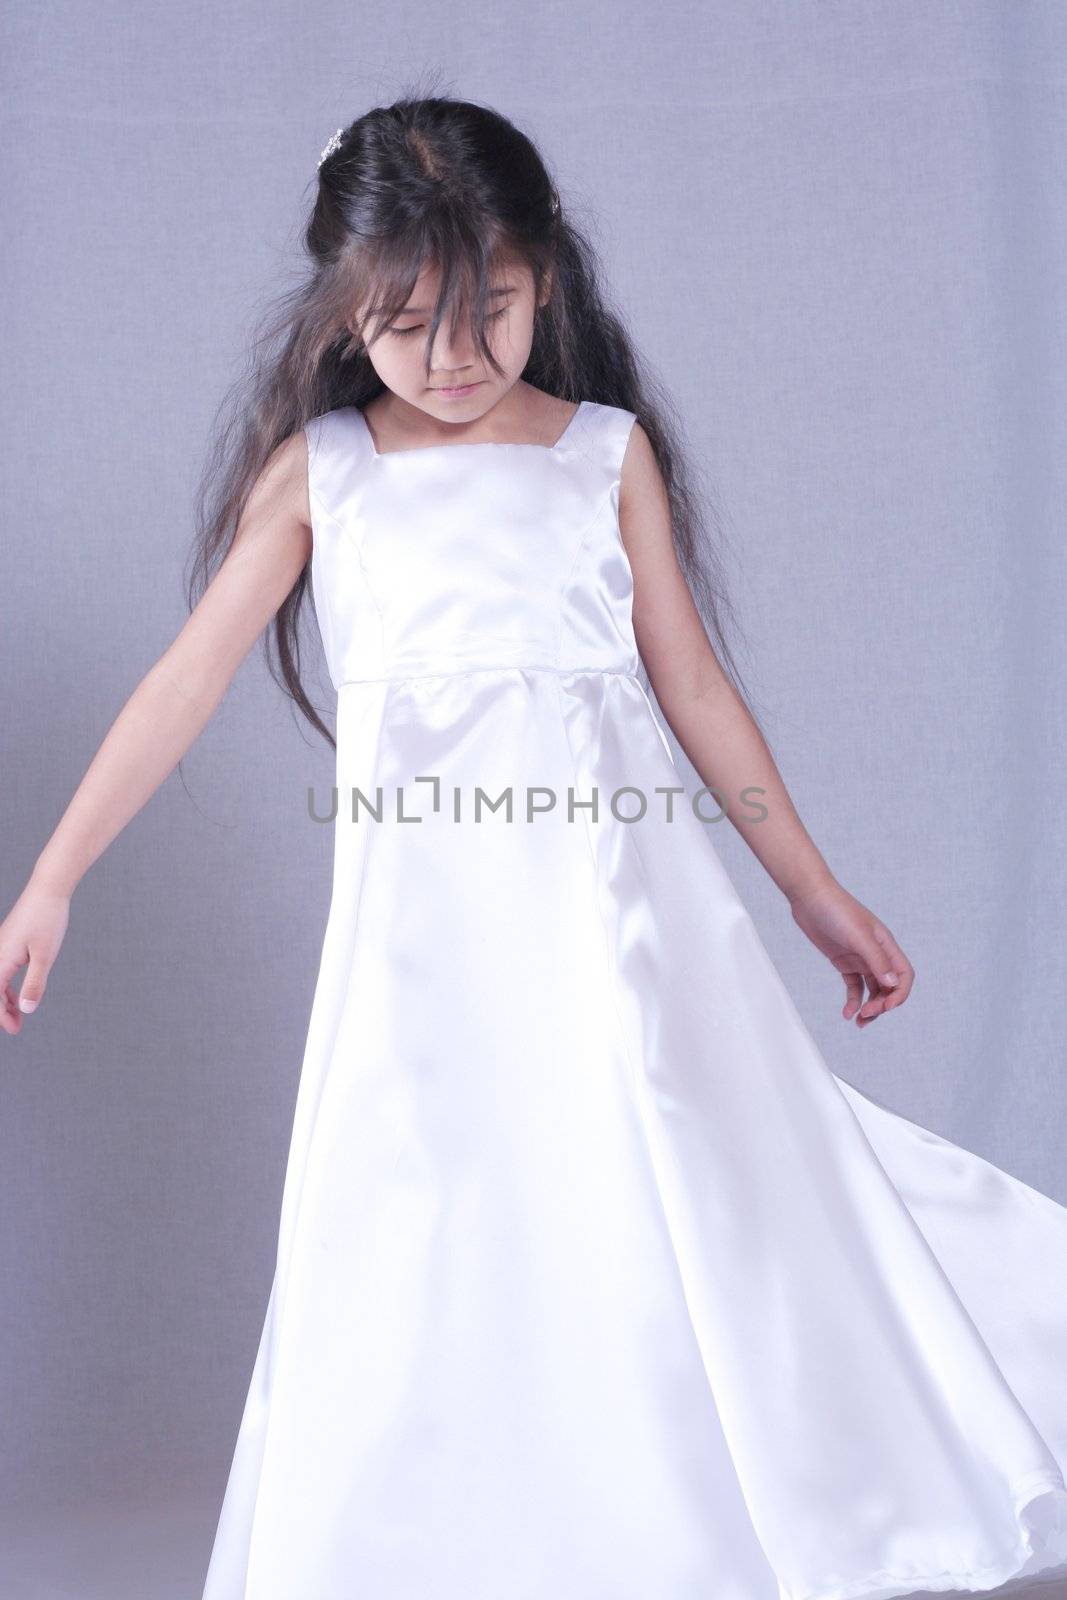 Beautiful little girl in white satin gown twirling playfully by jarenwicklund